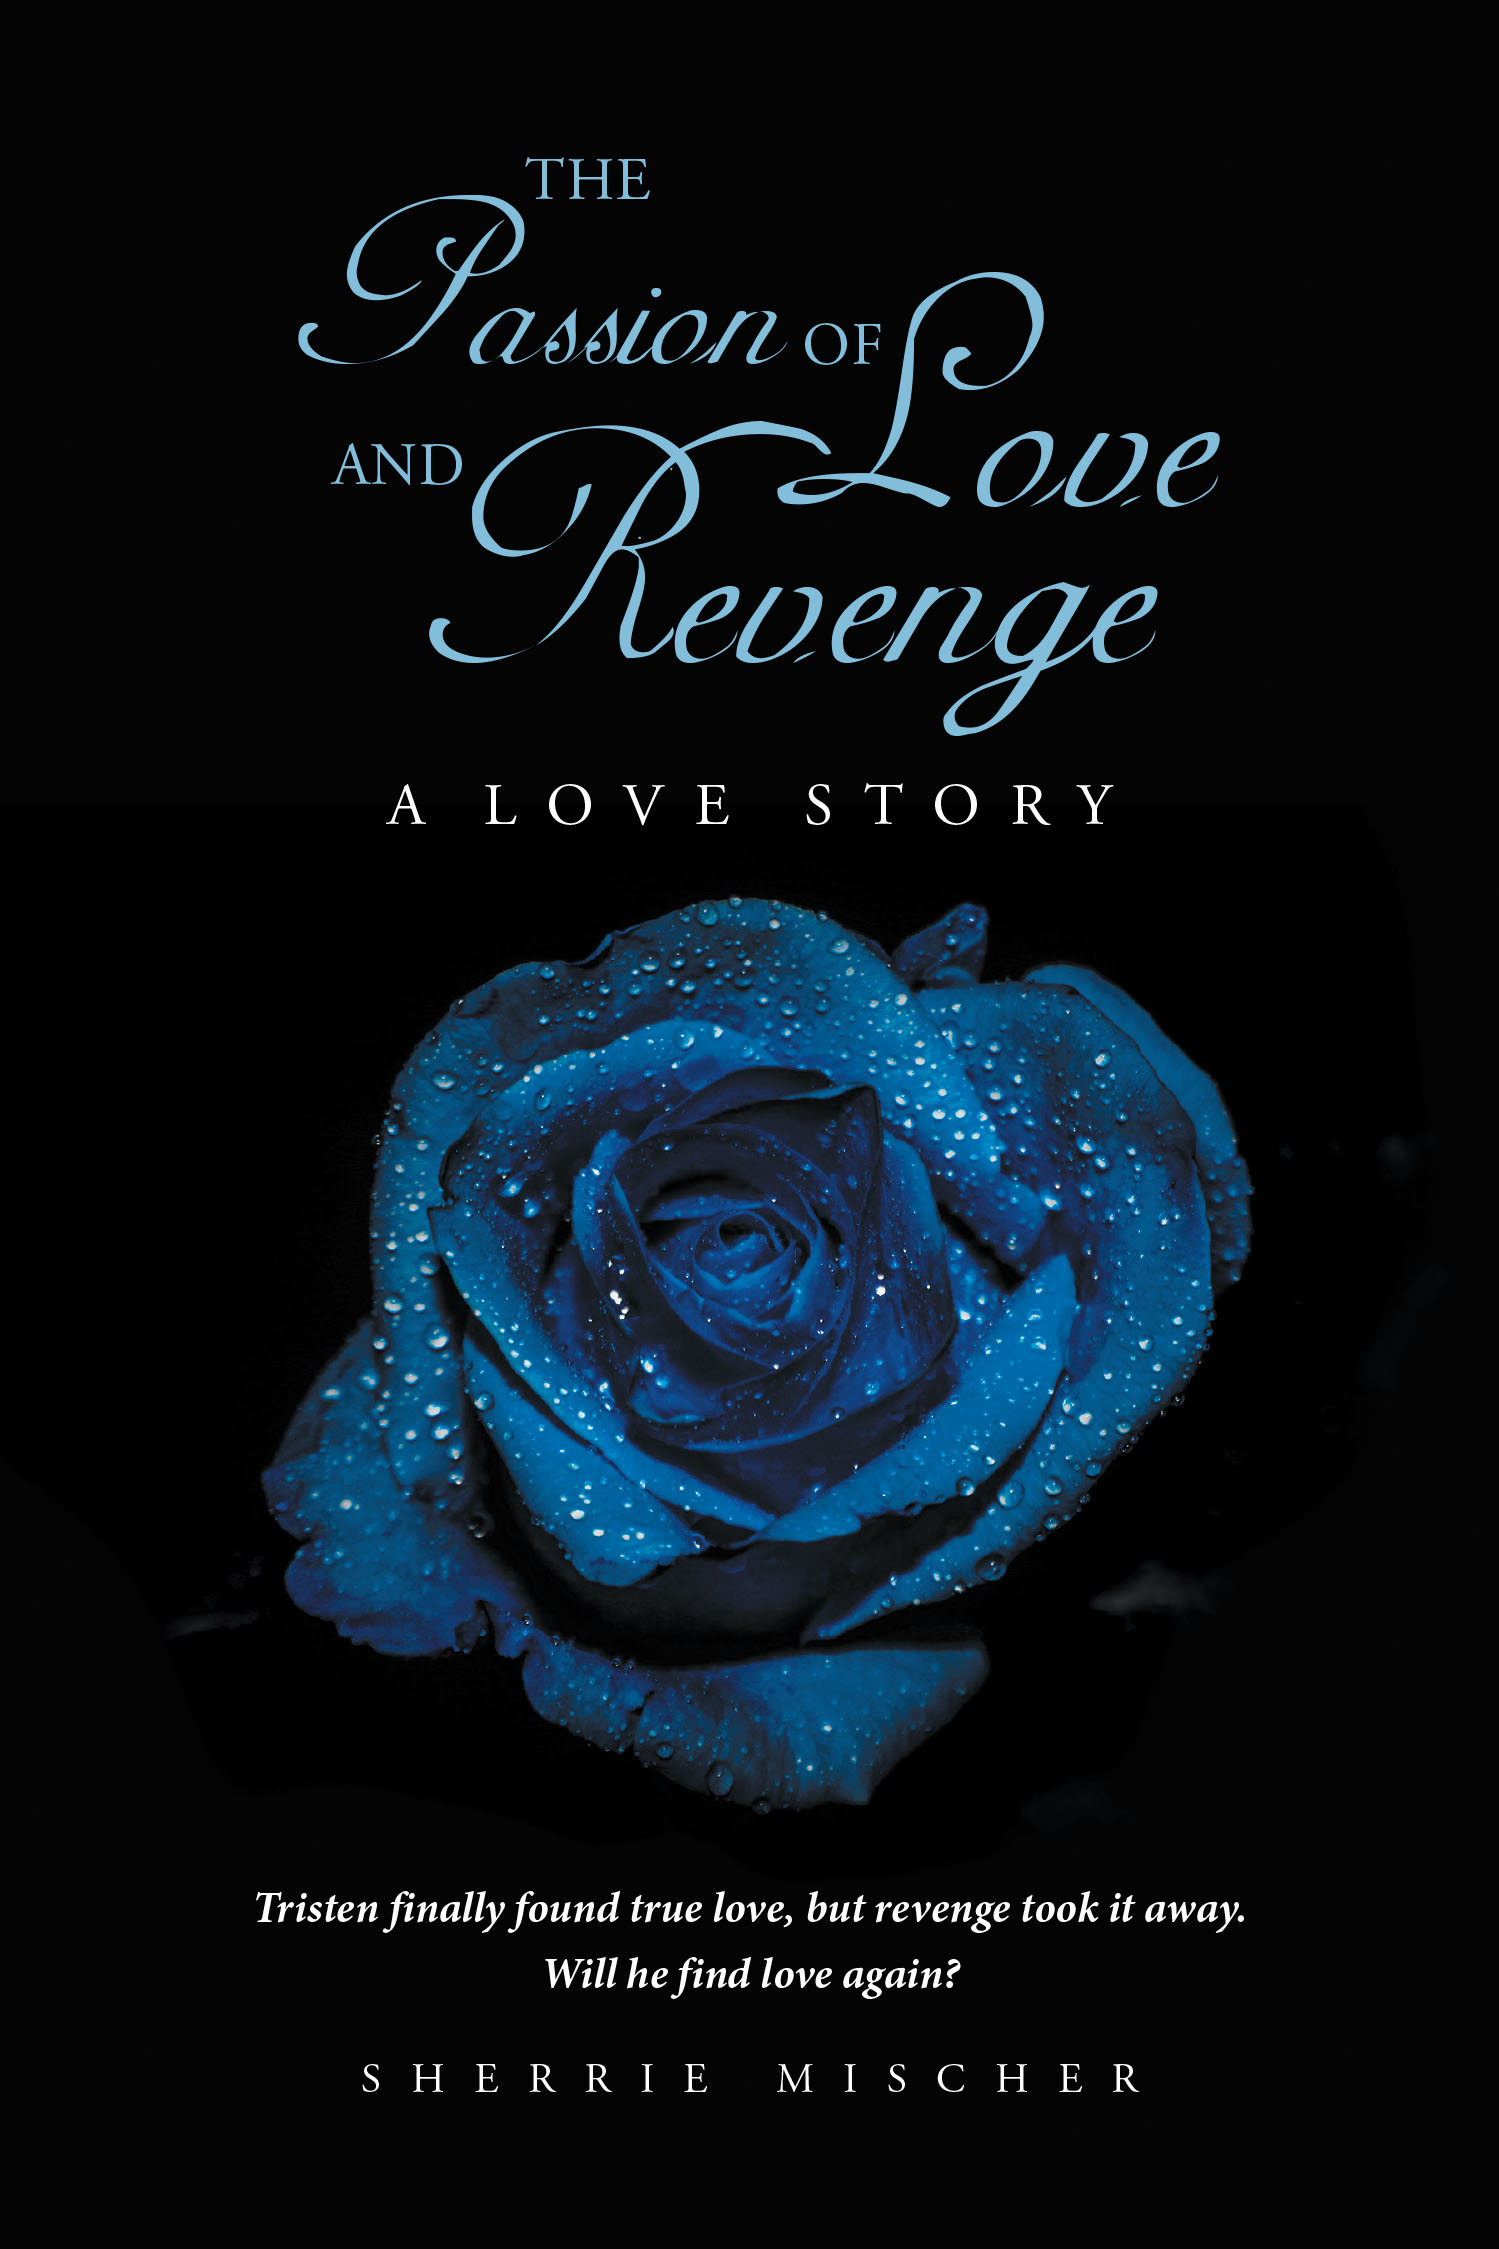 Author Sherrie Mischer’s New Book, “The Passion of Love & Revenge: A Love Story,” is a Riveting Tale of One Man’s Journey for Love and Discovering His Ultimate Destiny